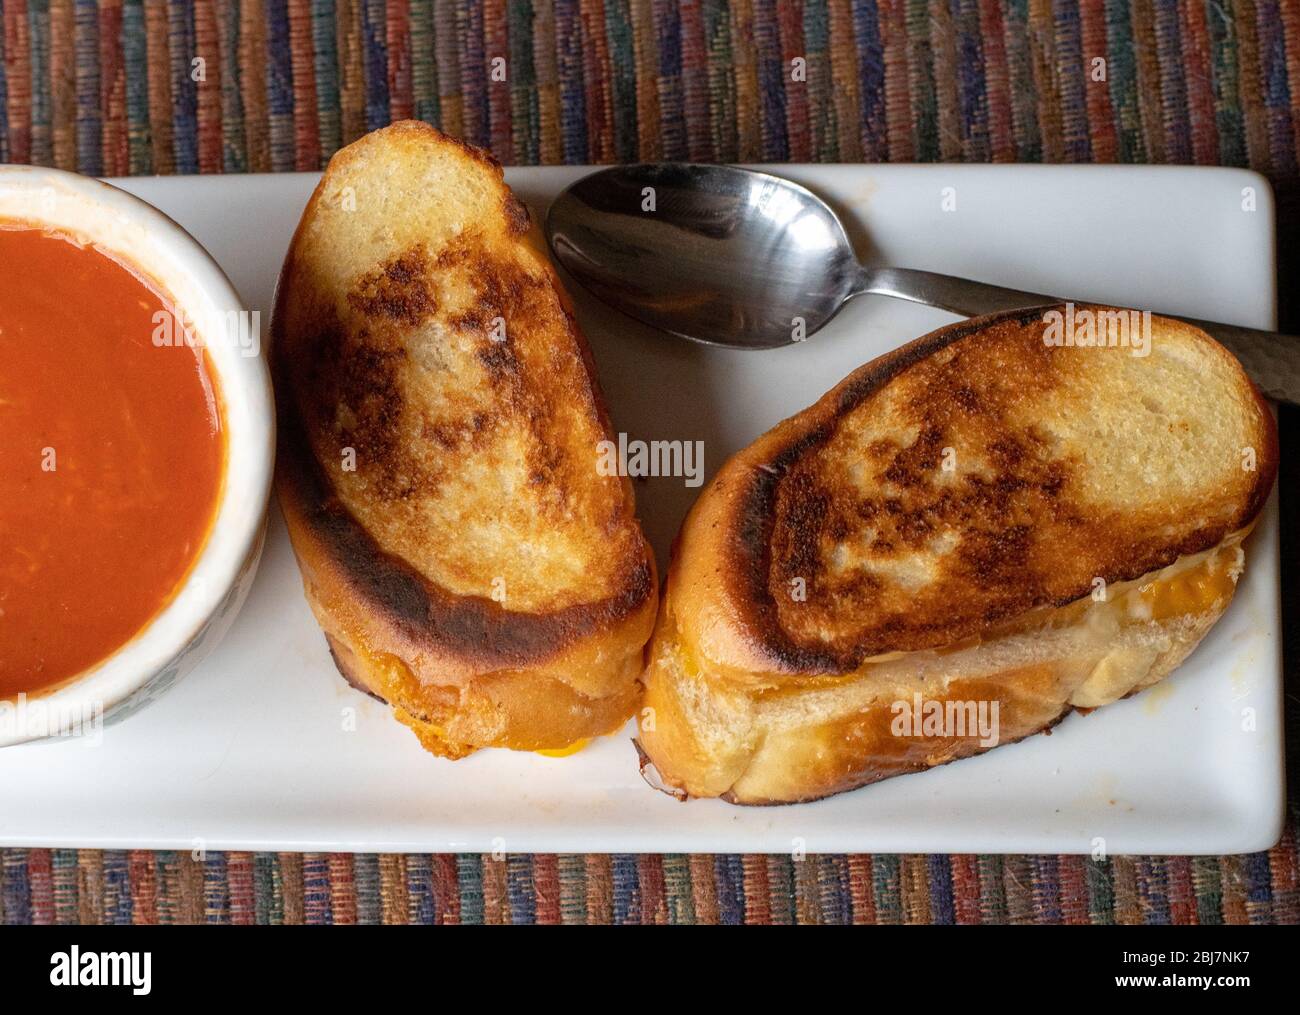 Grilled cheese sandwiches and tomato soup; easy comfort food during a pandemic Stock Photo